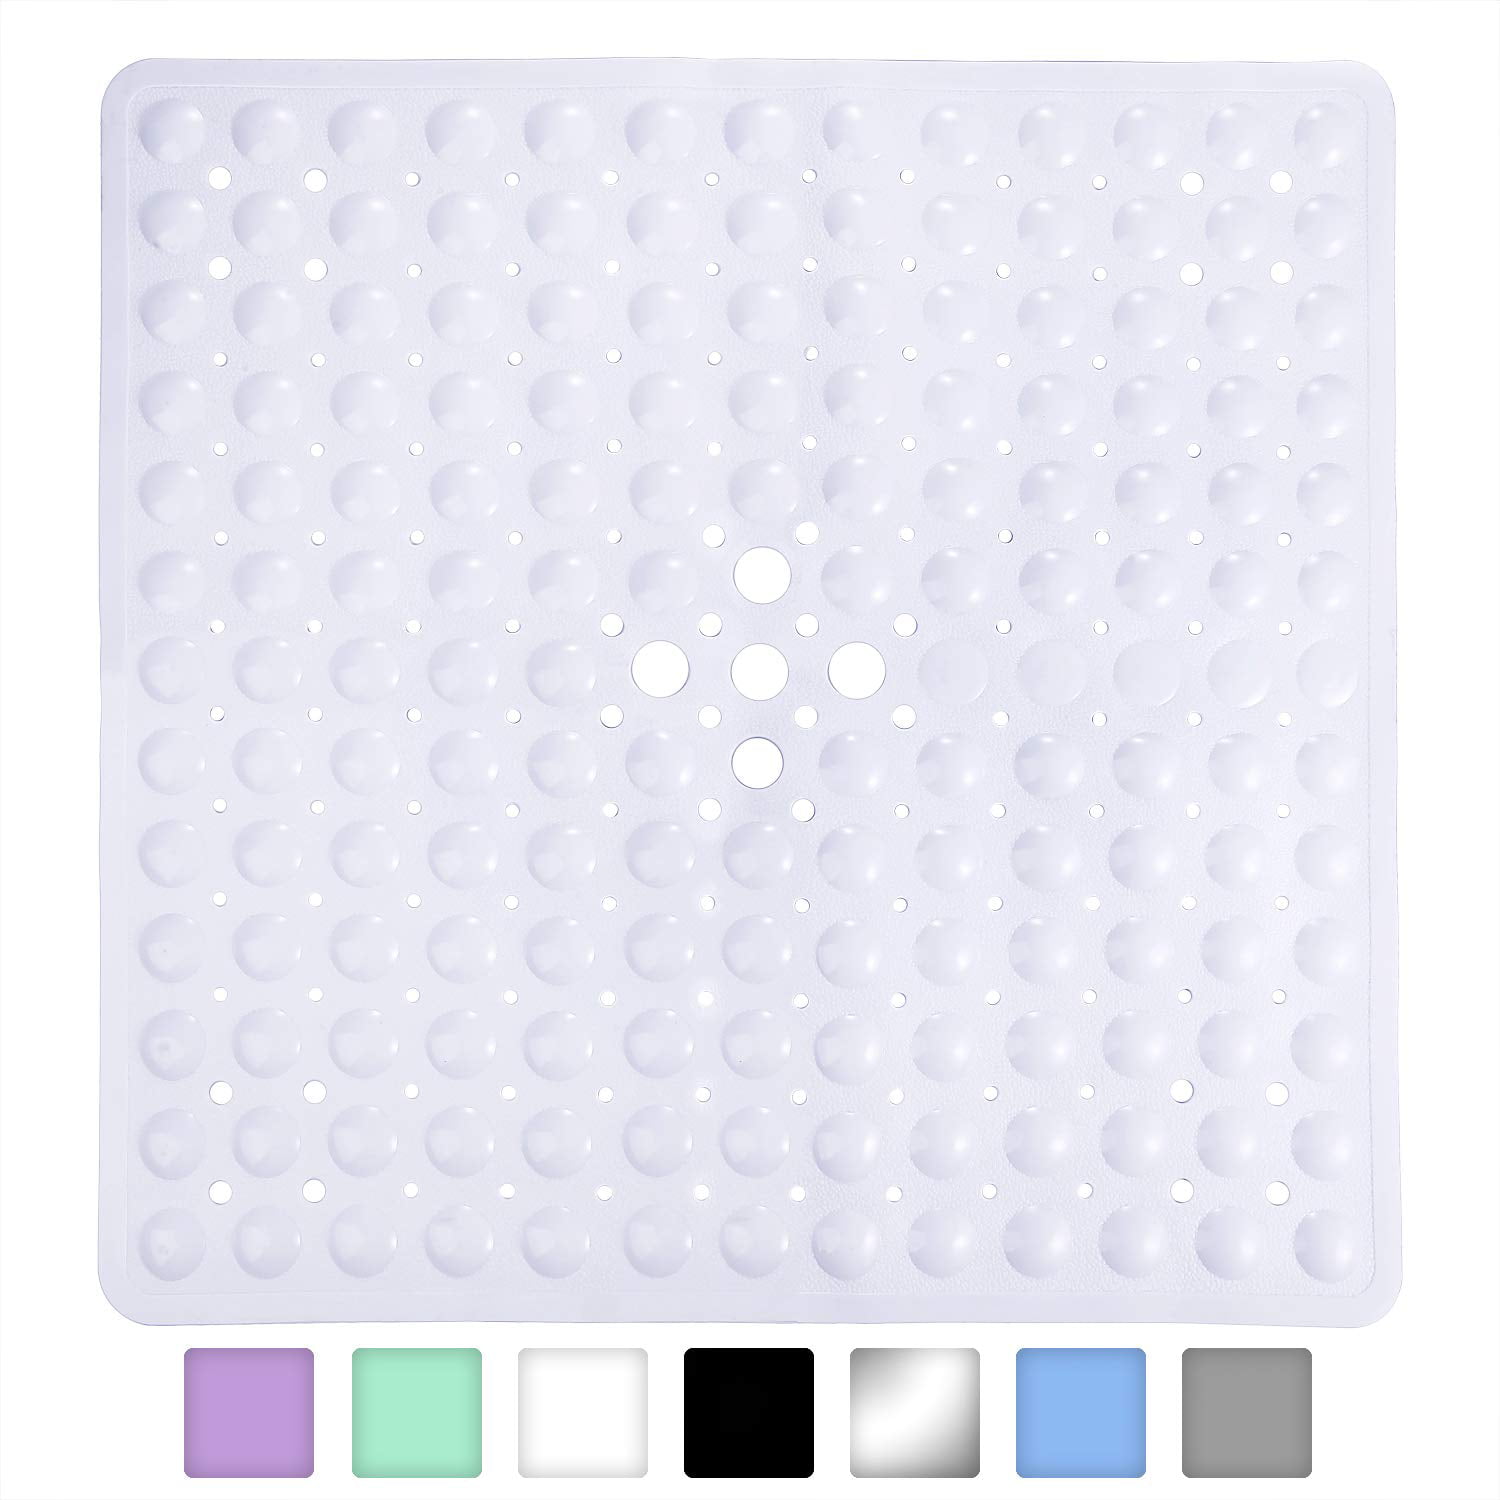 Evelots Square Shower Mat-Large-Drain Hole-Non Slip-Super Thick-164 Suction Cups 